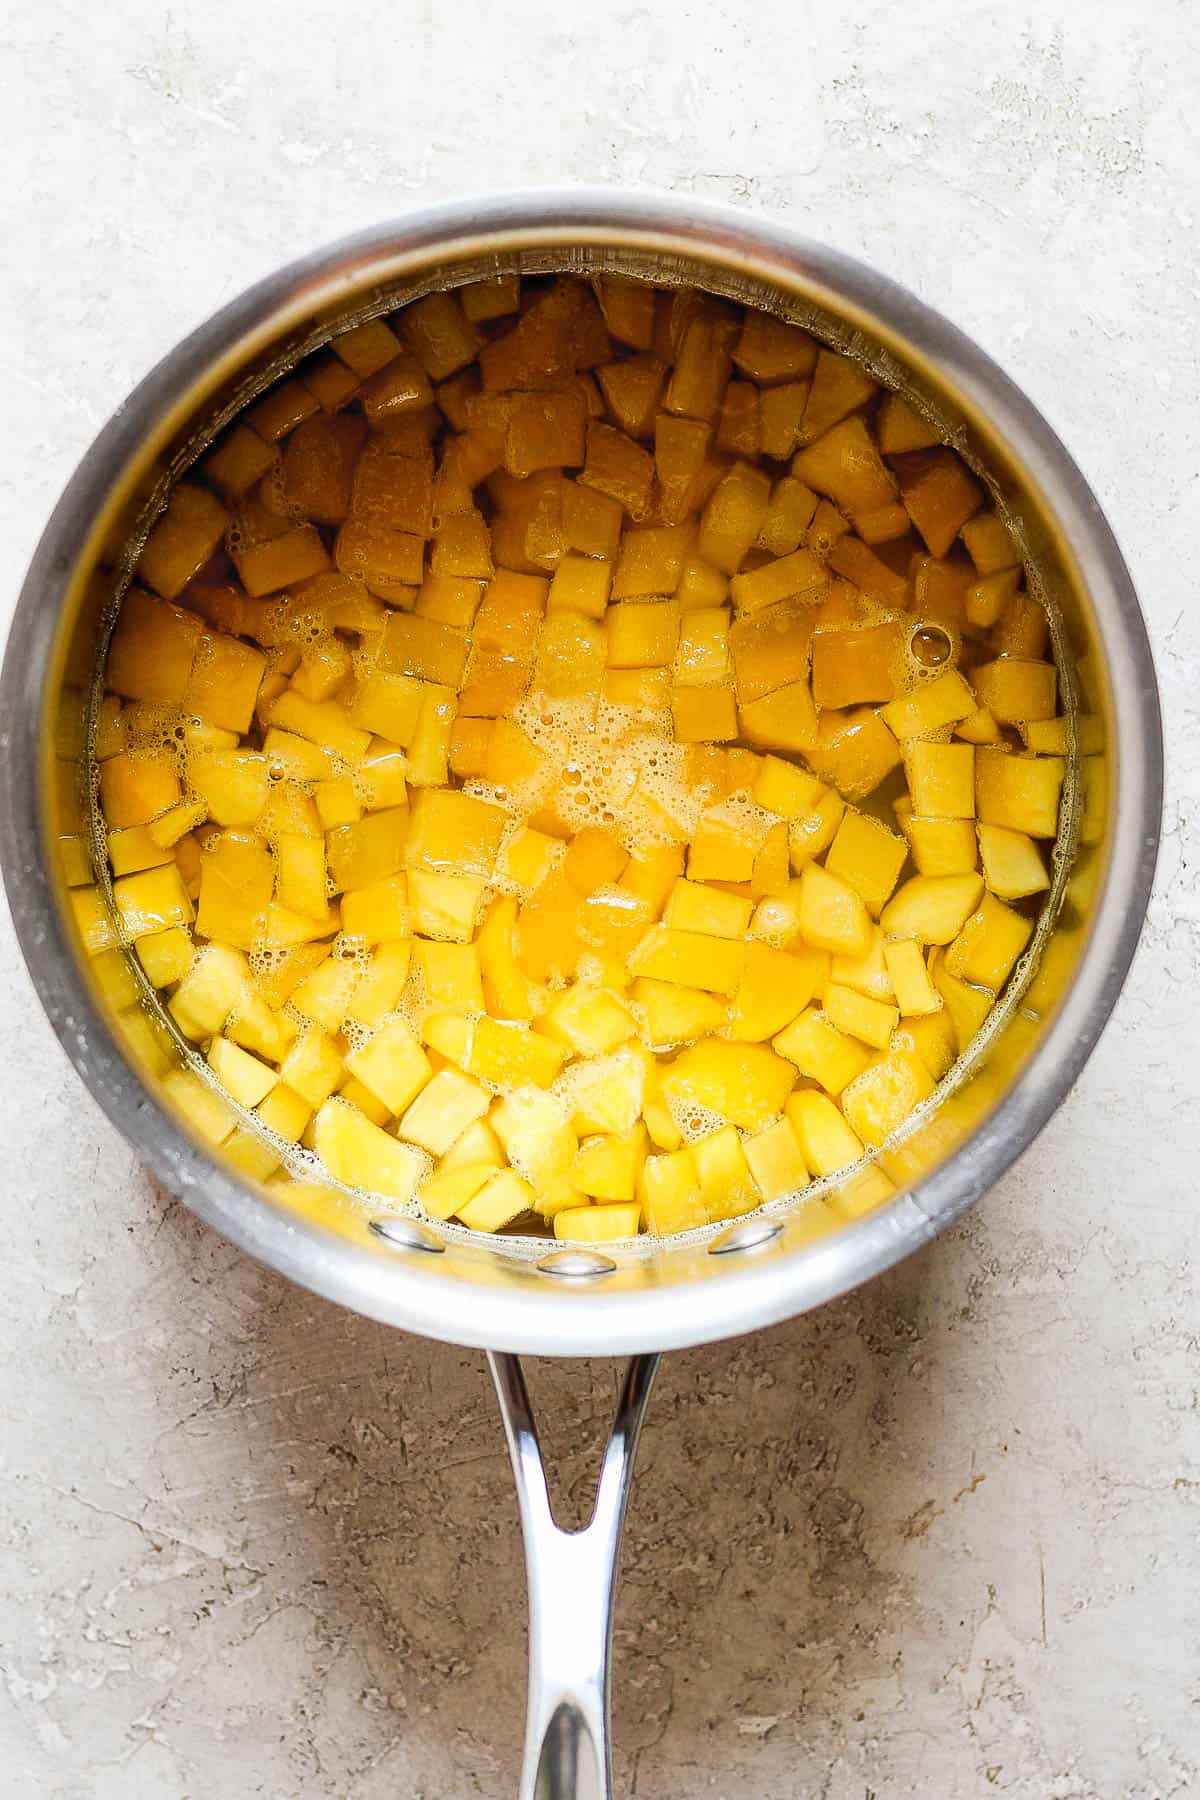 Diced mango in a saucepan with water and sugar to create a syrup for raspados.